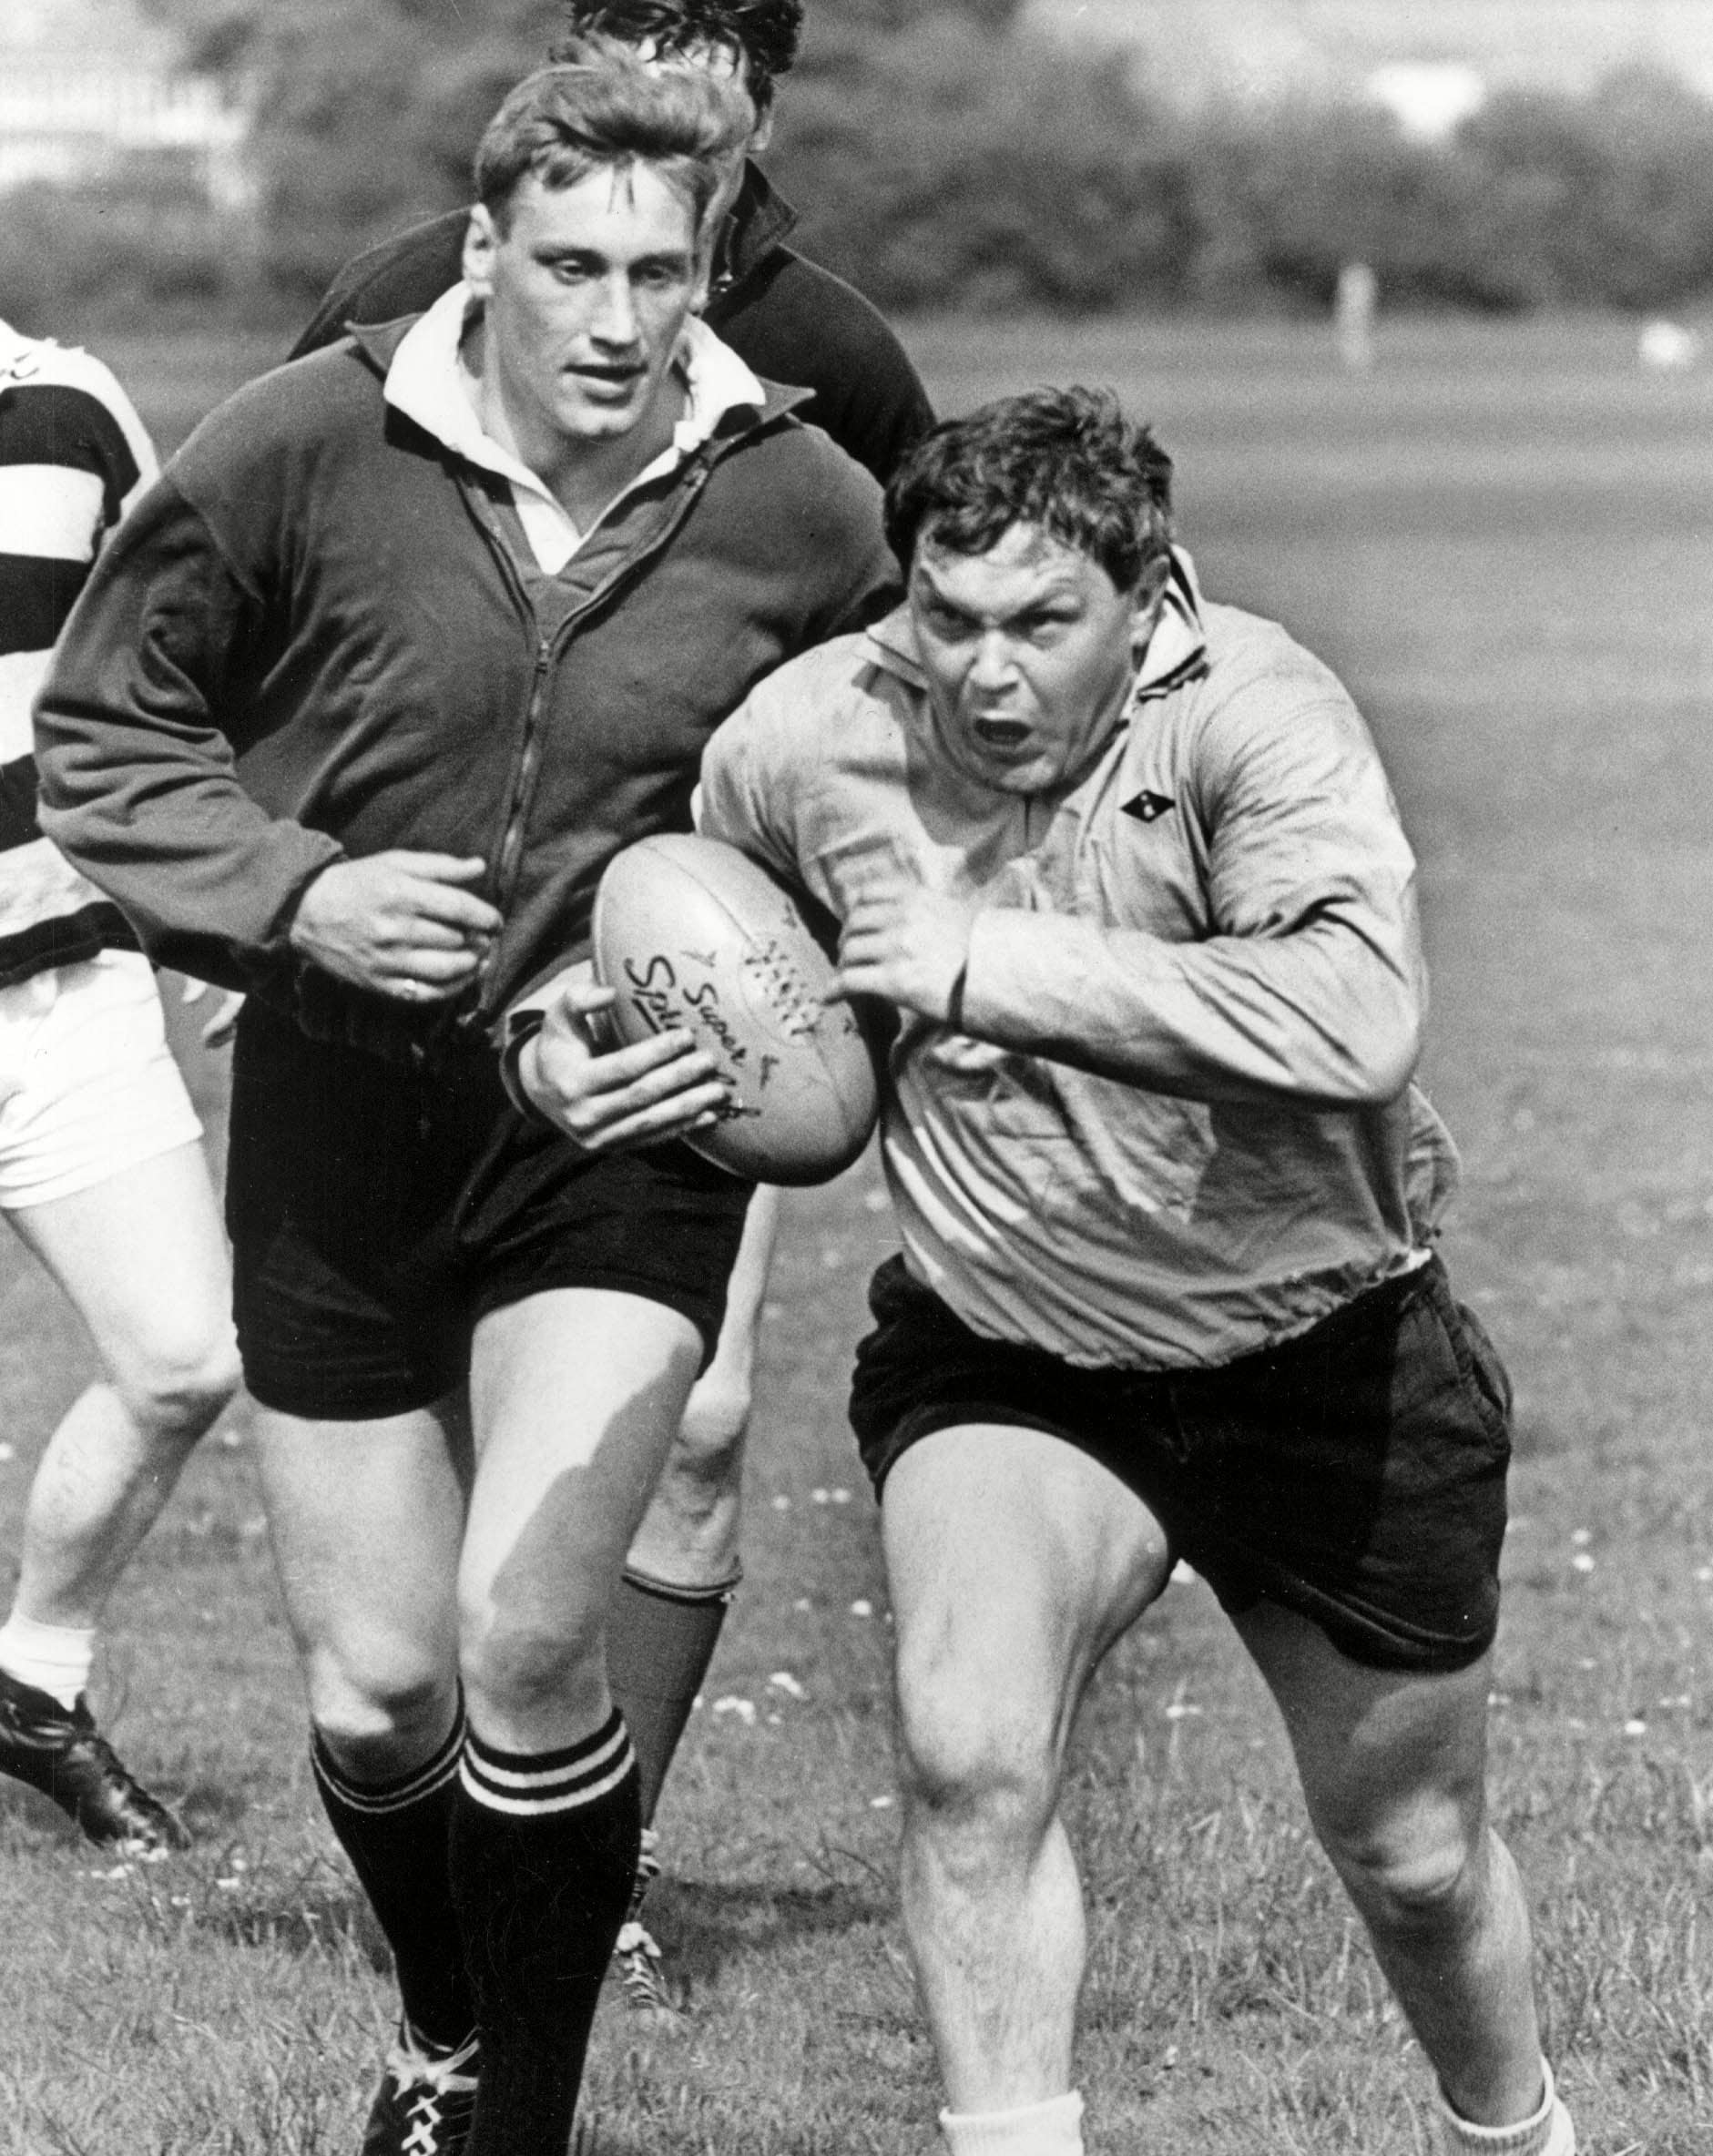 john o’shea, welsh rugby prop who became the first lion to be sent off for foul play – obituary